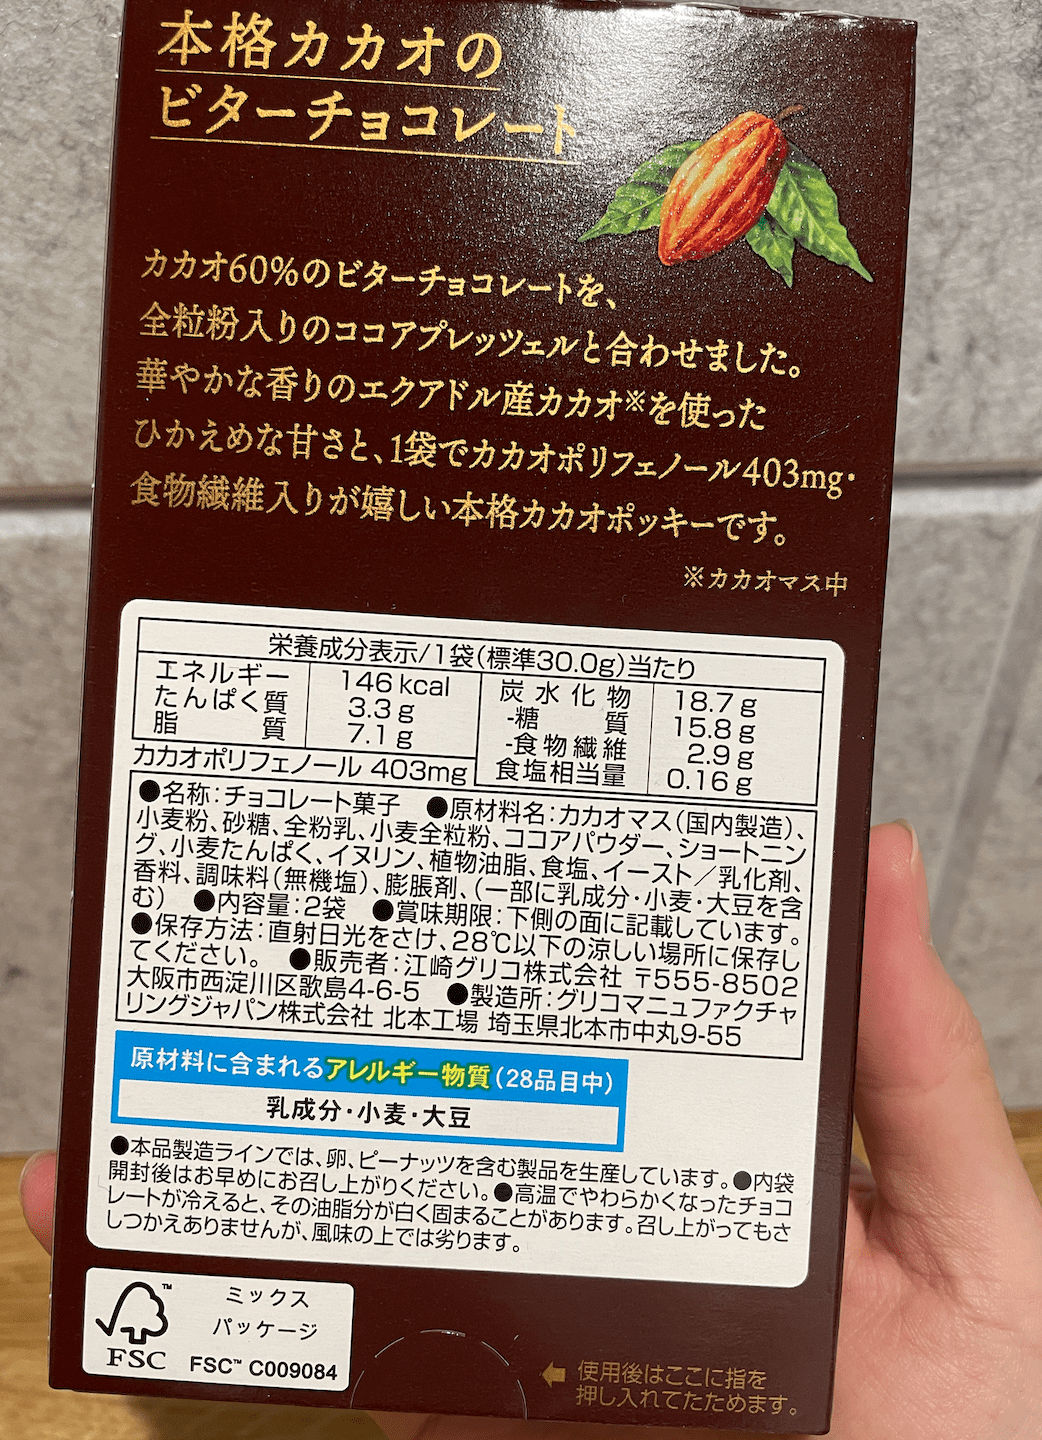 Actual product image of Pocky-Cacao-60% 2